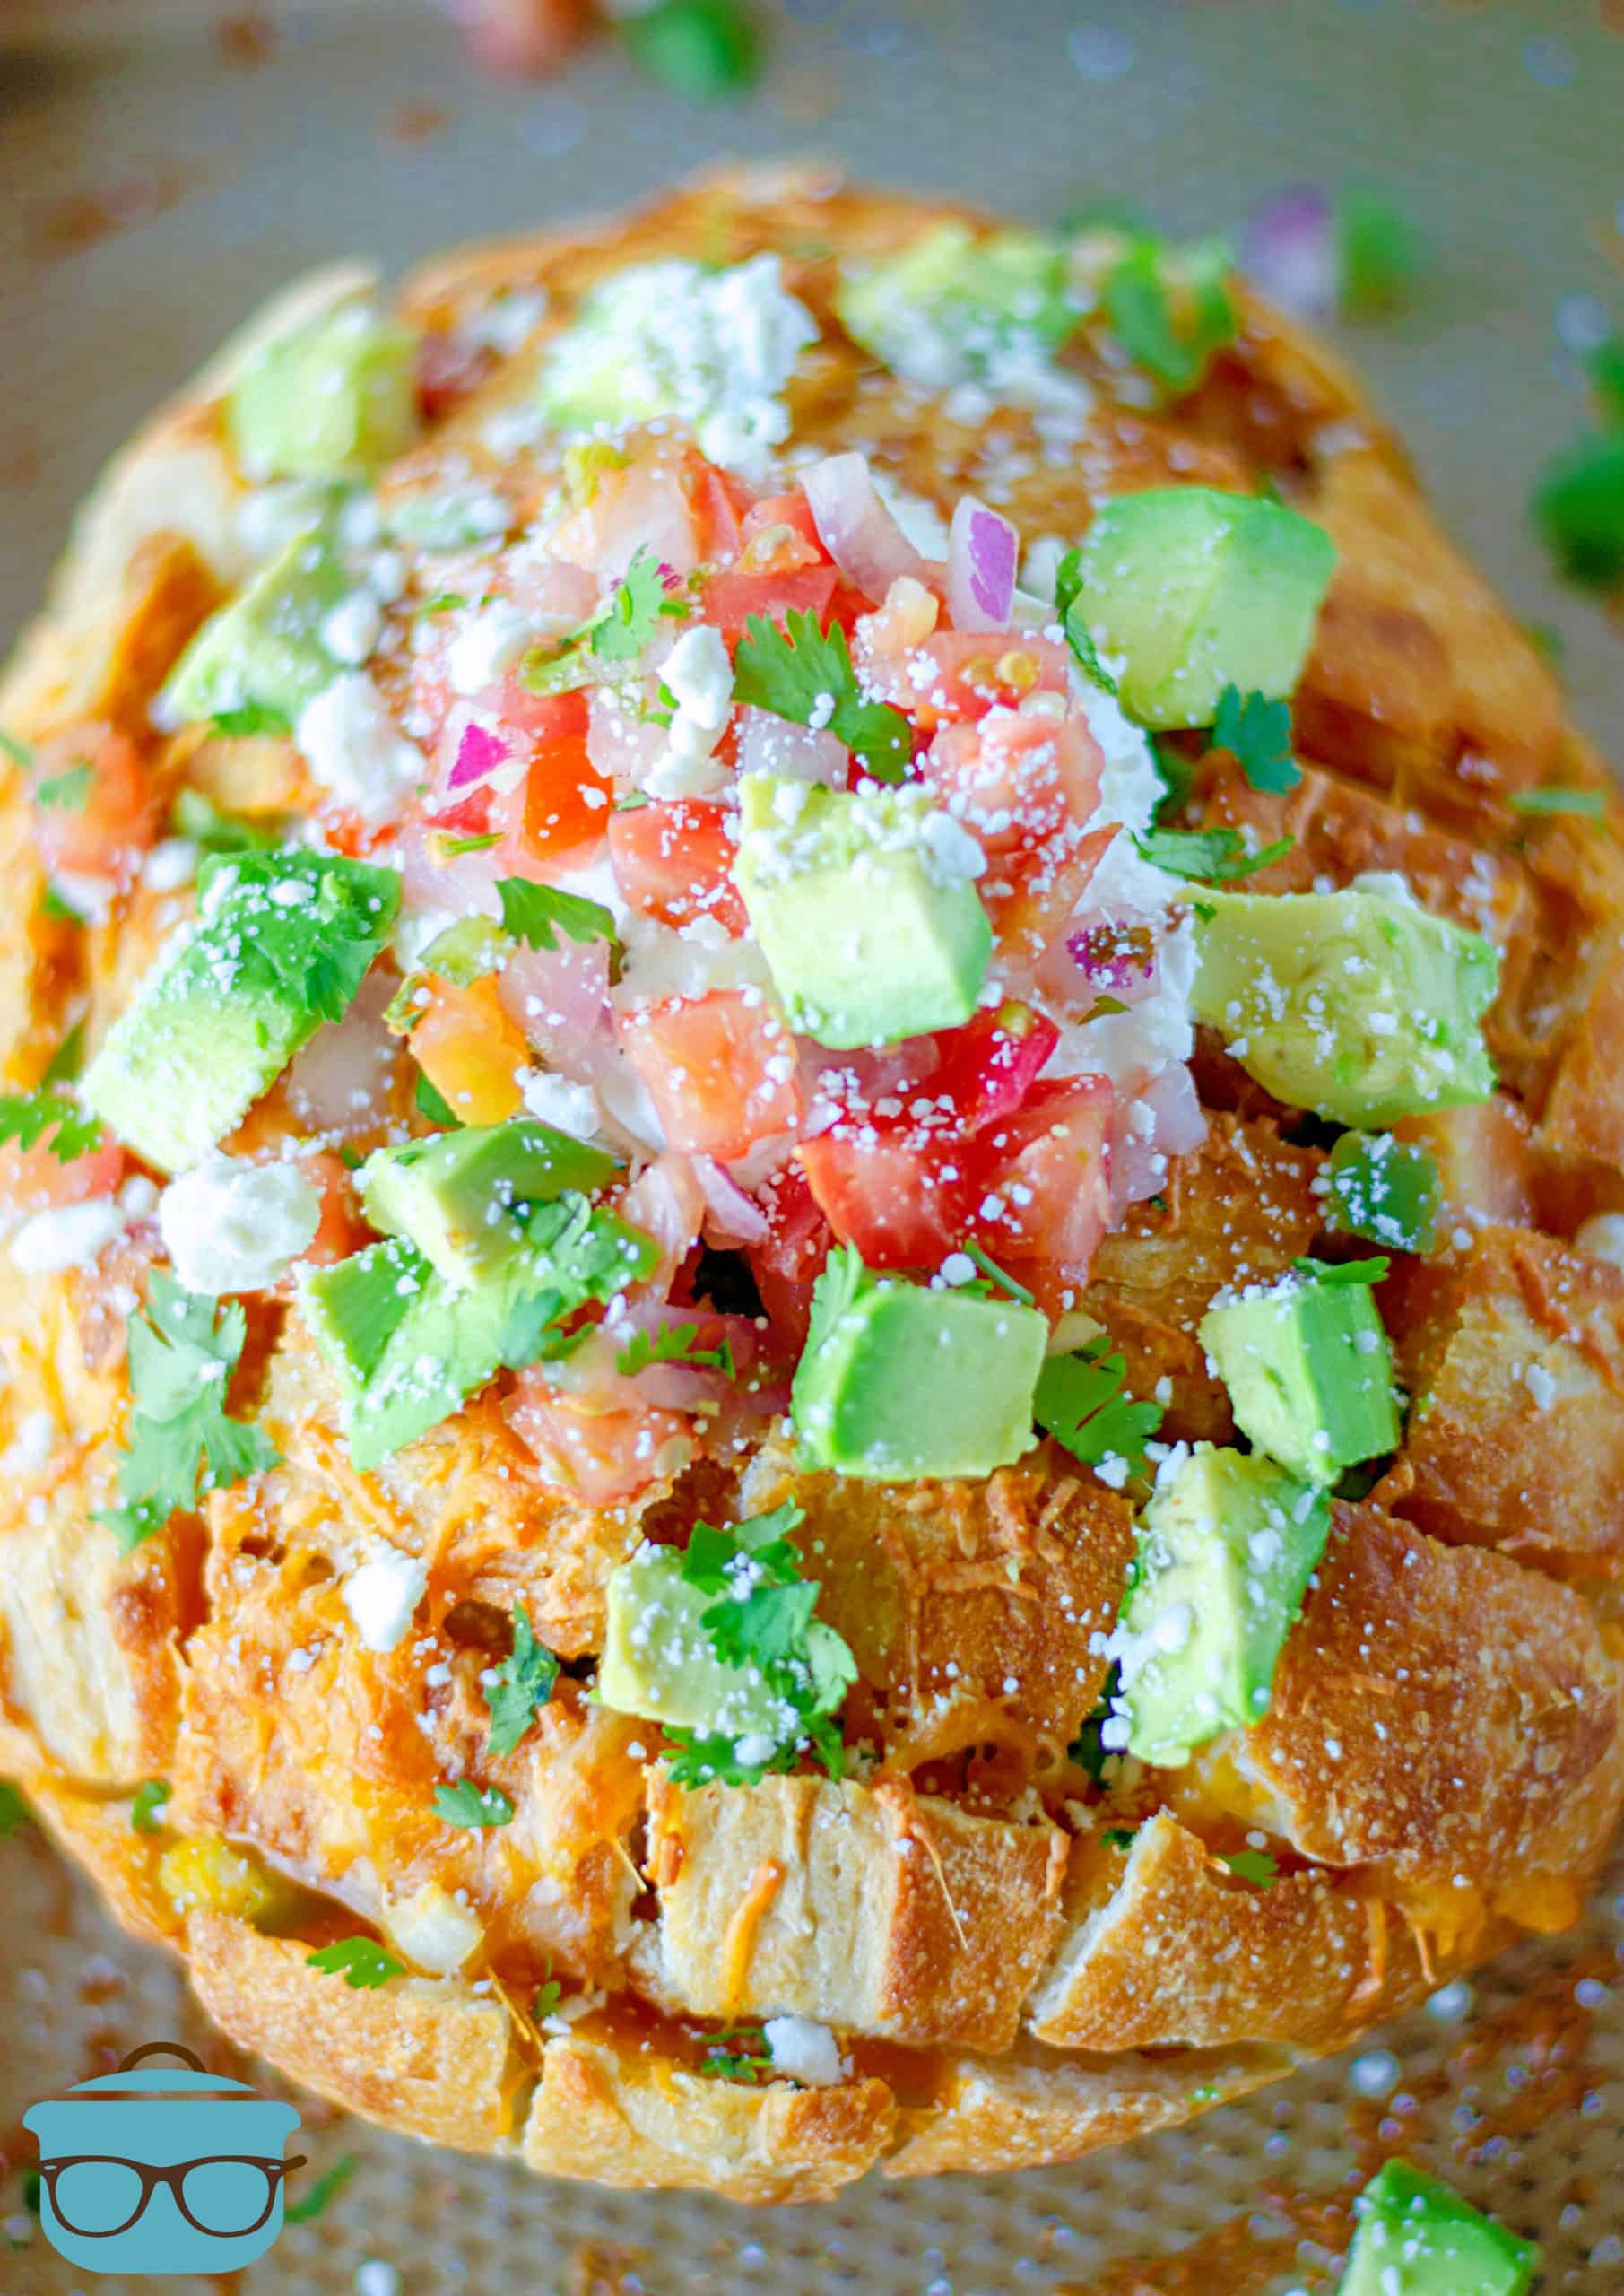 Finished Pull Apart Bread topped with taco toppings.